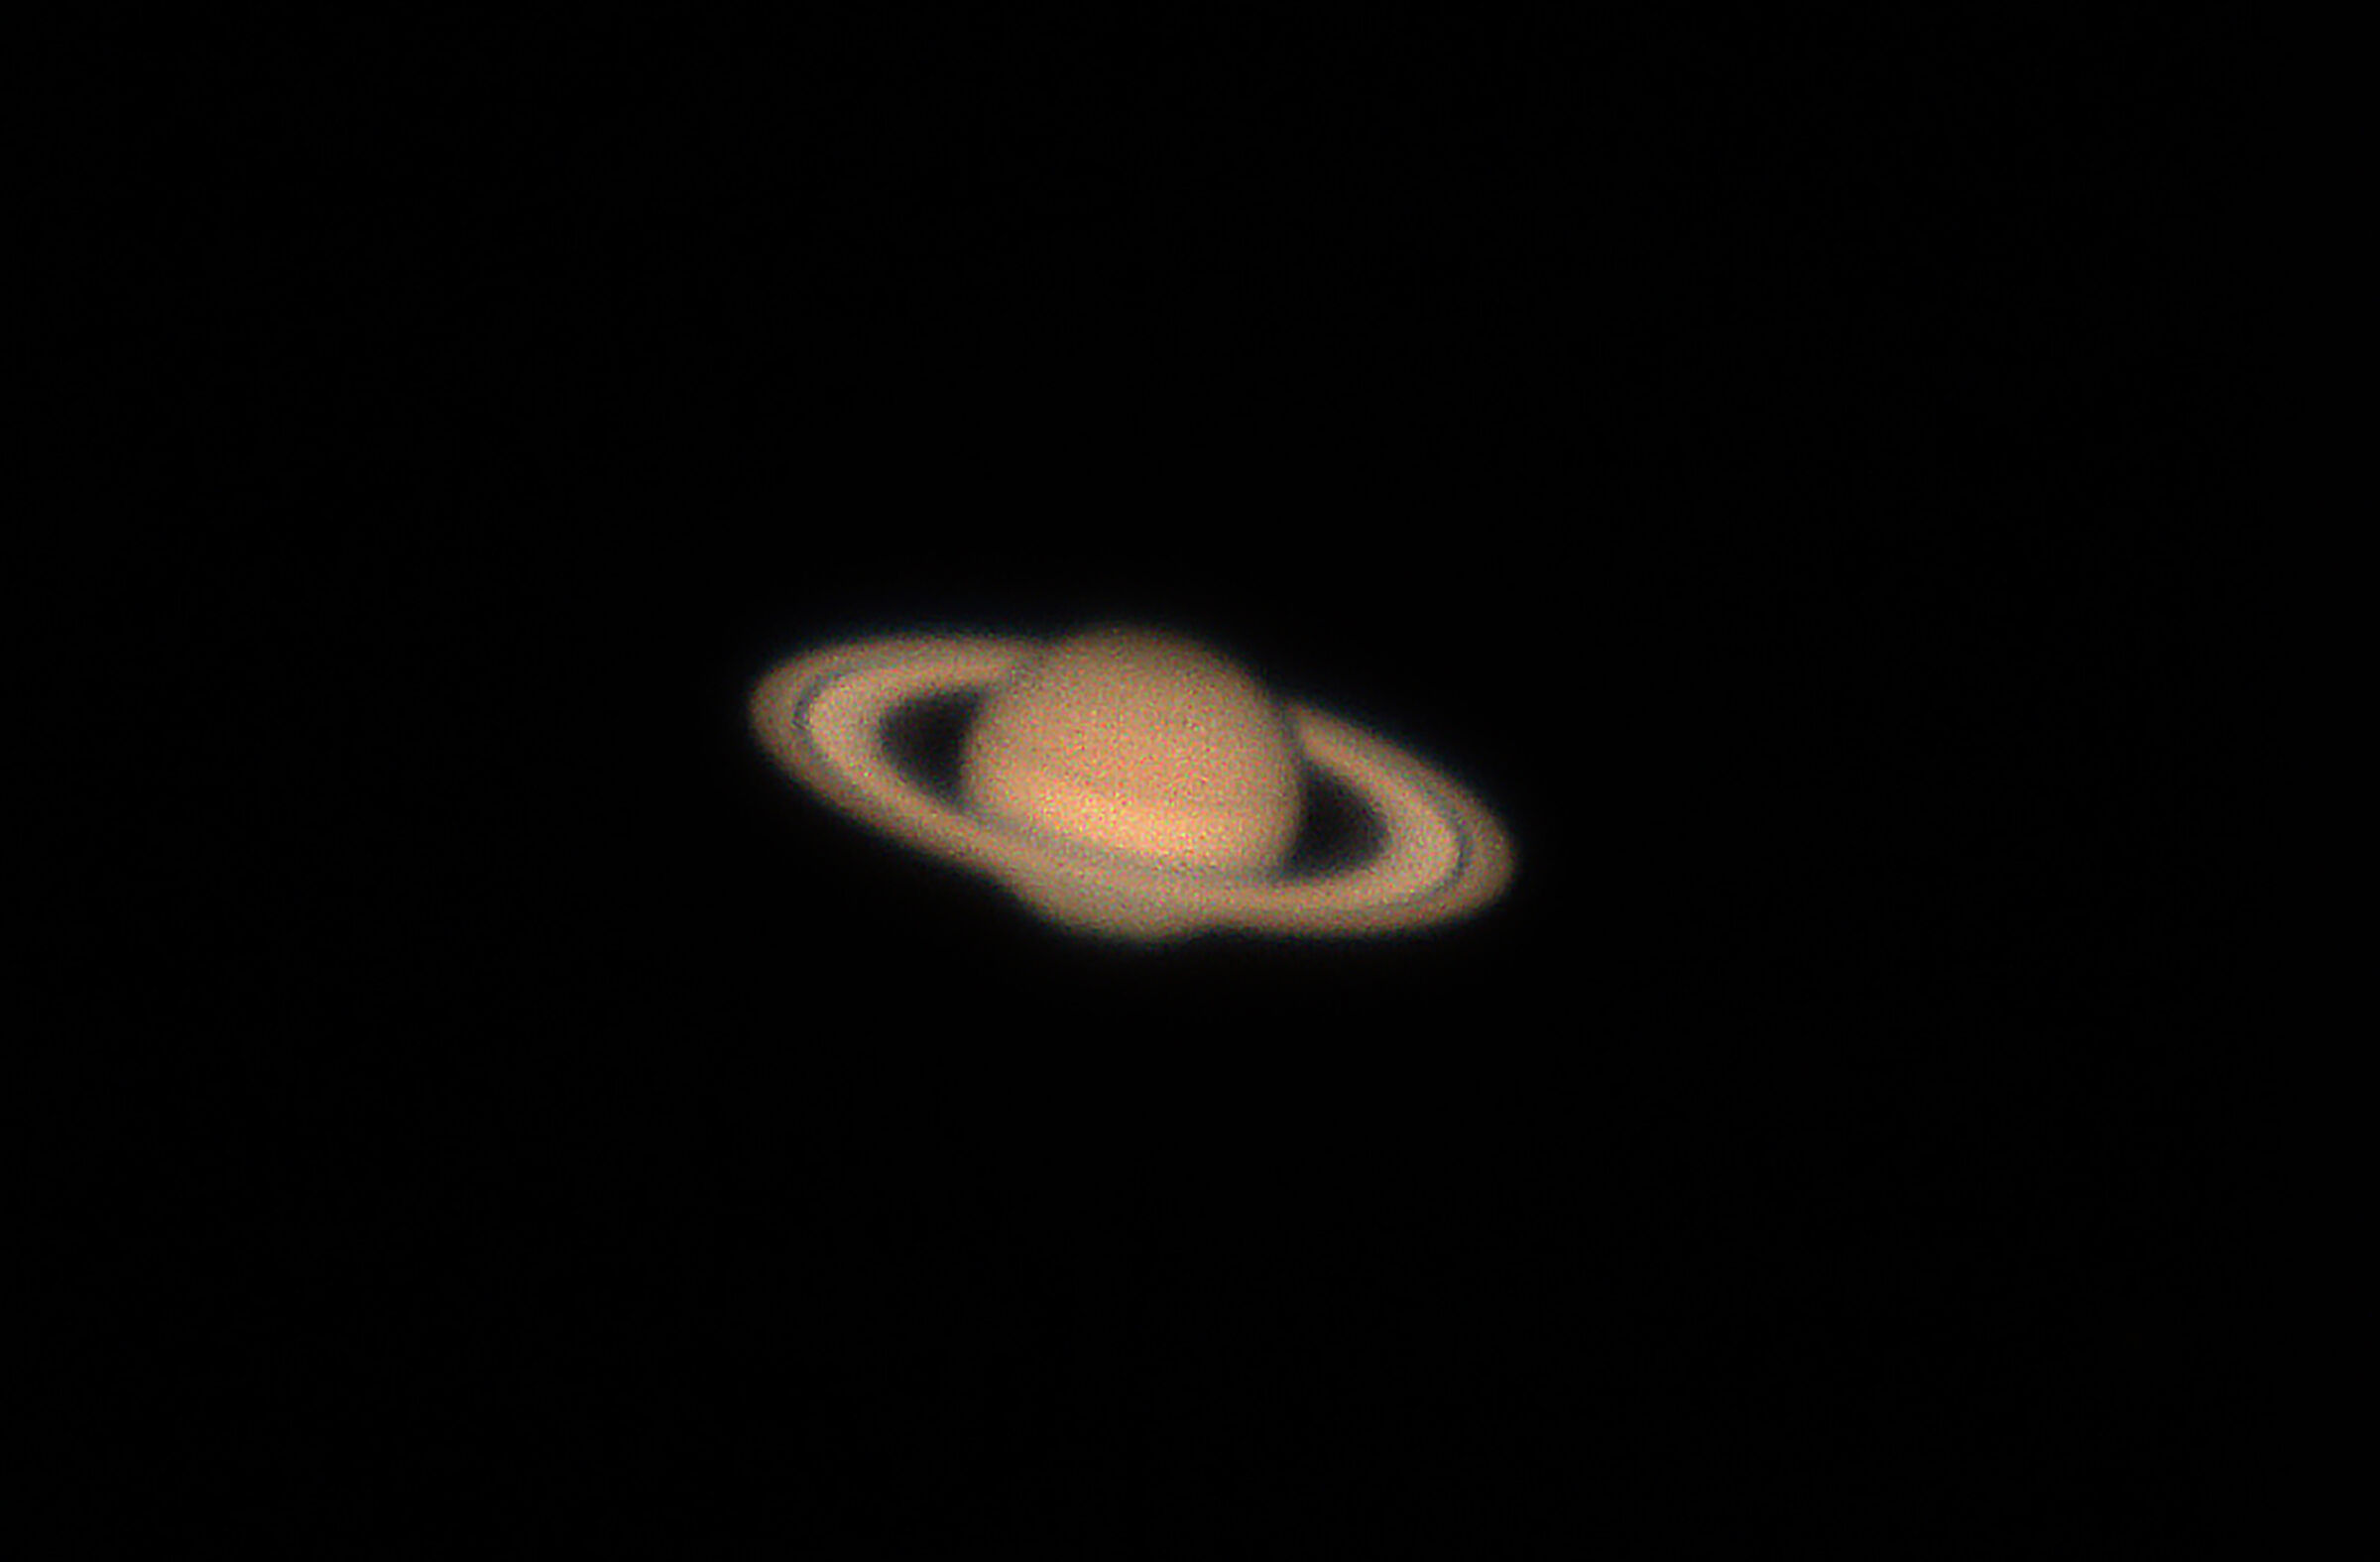 Saturn in all its glory...